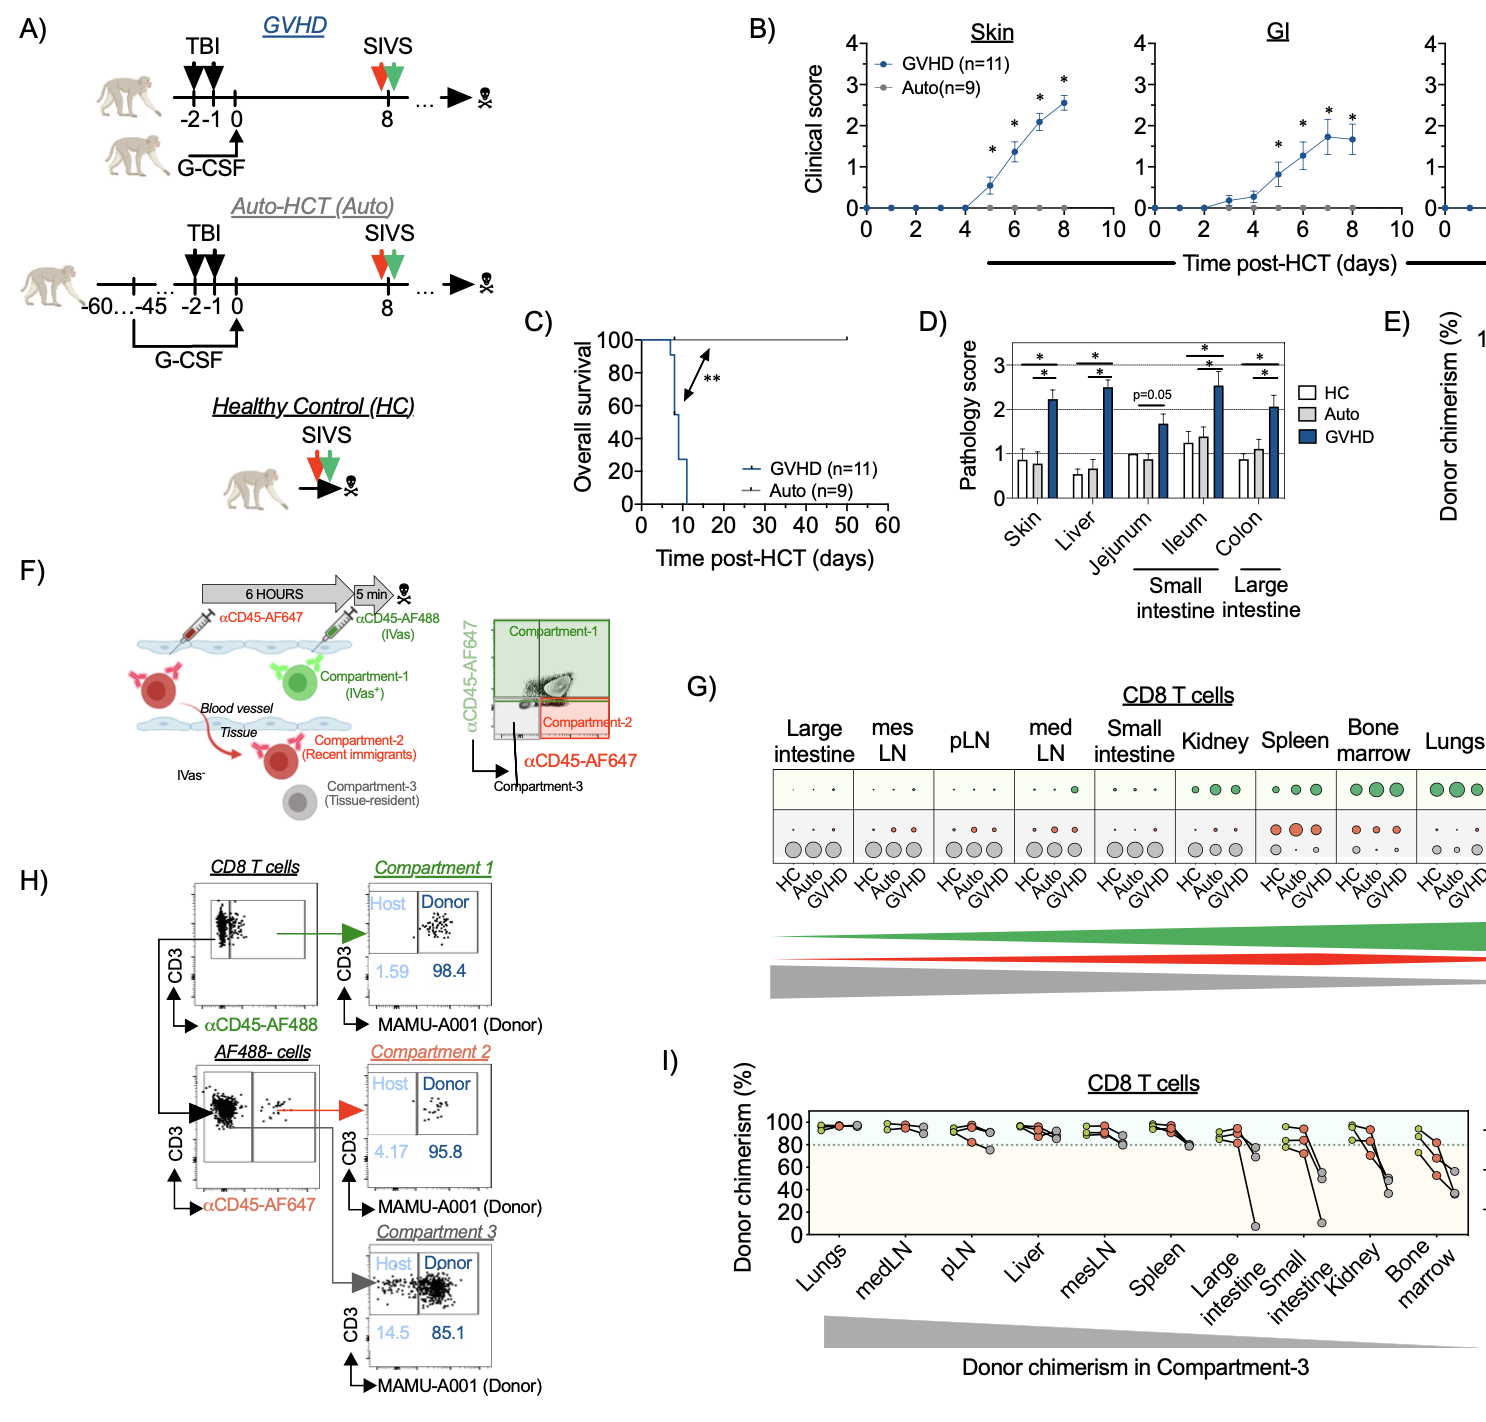 Spatiotemporal single-cell profiling of gastrointestinal GVHD reveals invasive and resident memory T cell states